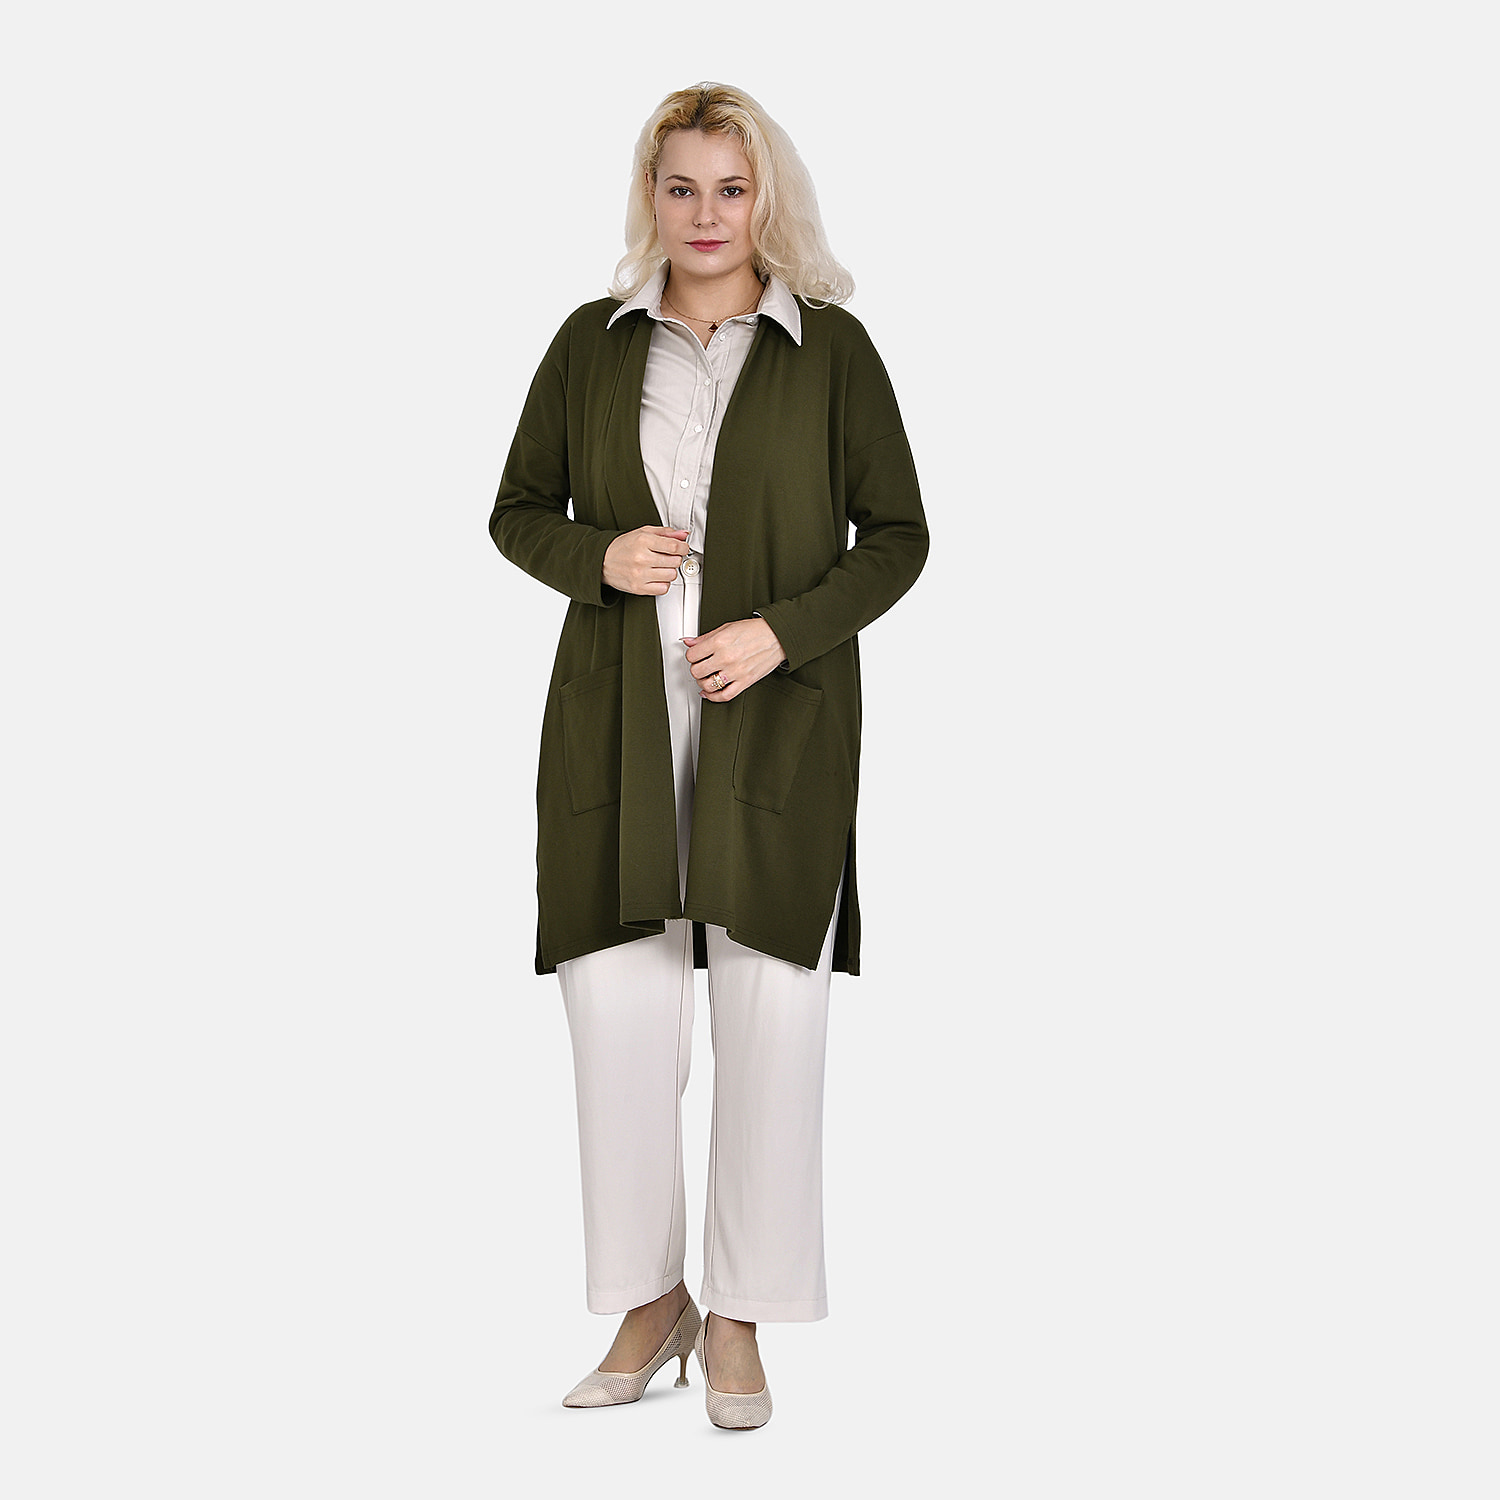 Tamsy 60% Cotton Blend Jersey Cardigan (One Size, 8-20) - Green